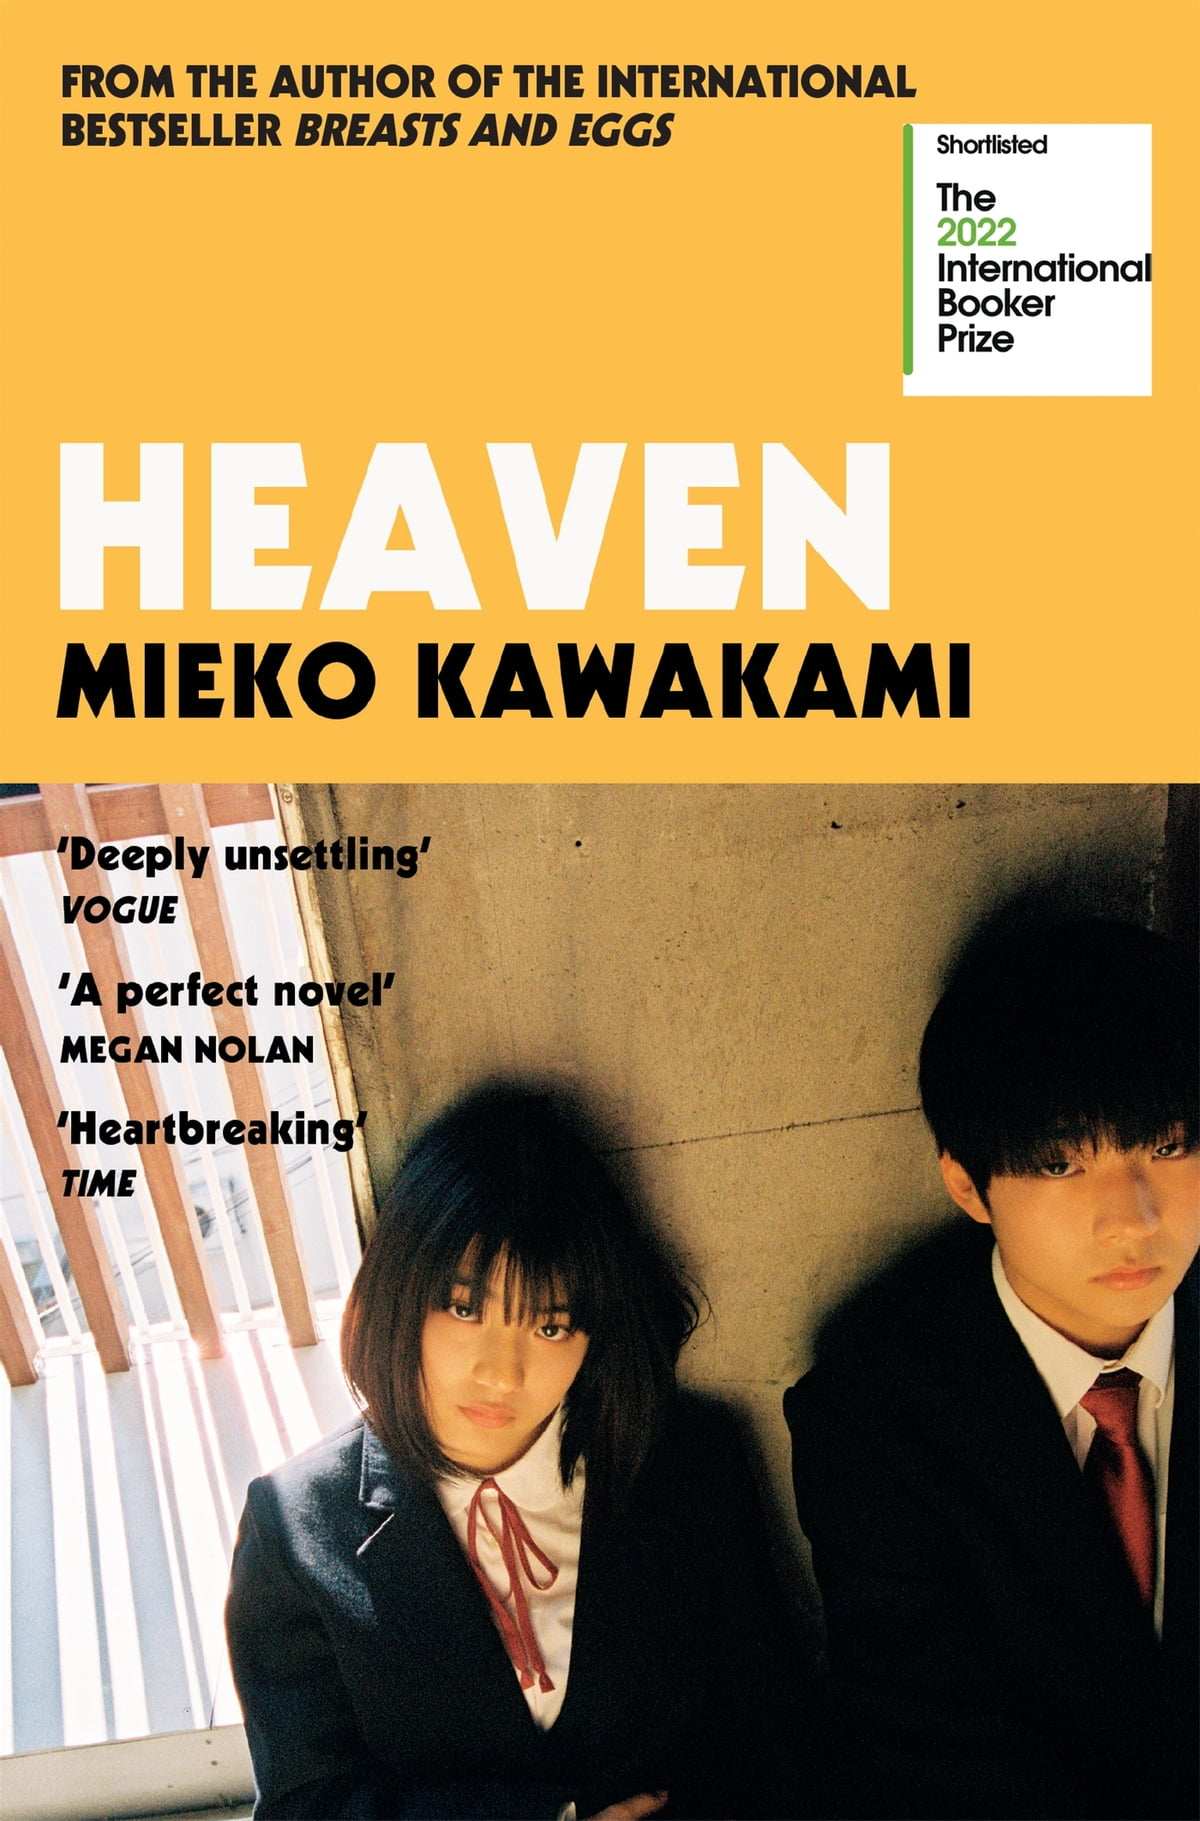 Detail from the cover of Mieko Kawakami’s novel “Heaven”, one of the Japanese novels in English translation that have seen a surge in popularity in the UK. 